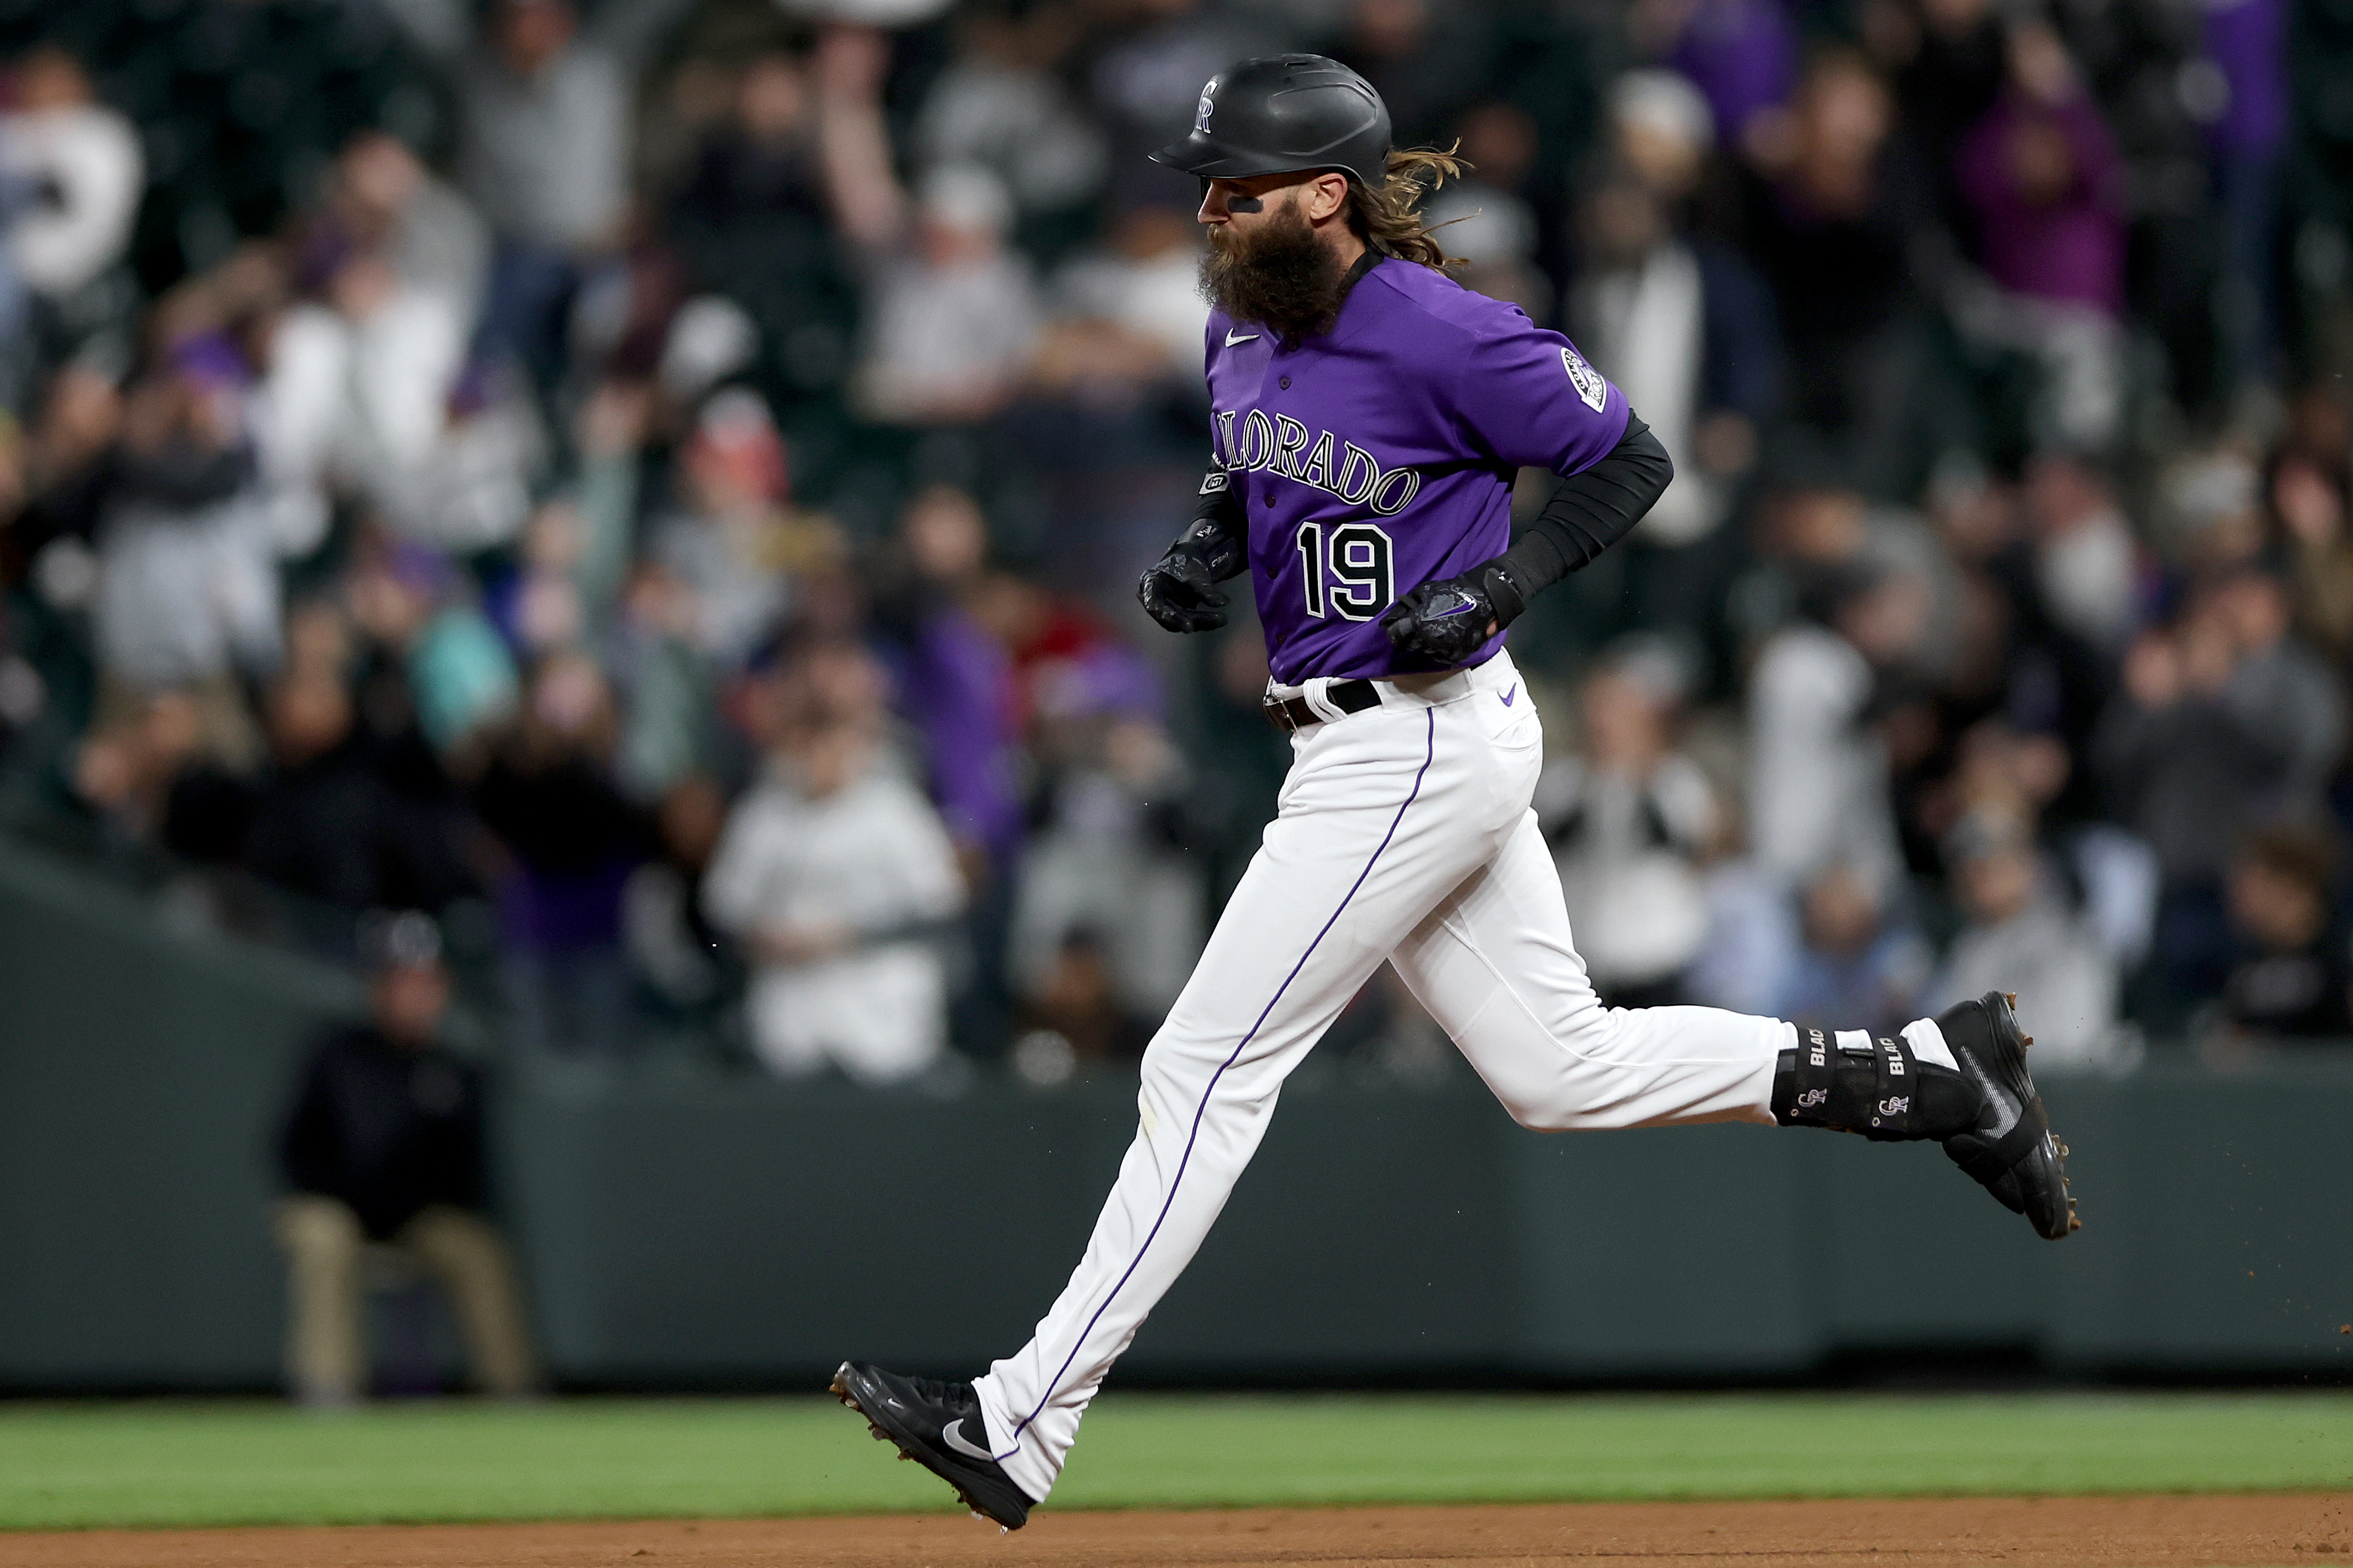 Series Preview: The Colorado Rockies? Now? In this economy? Can